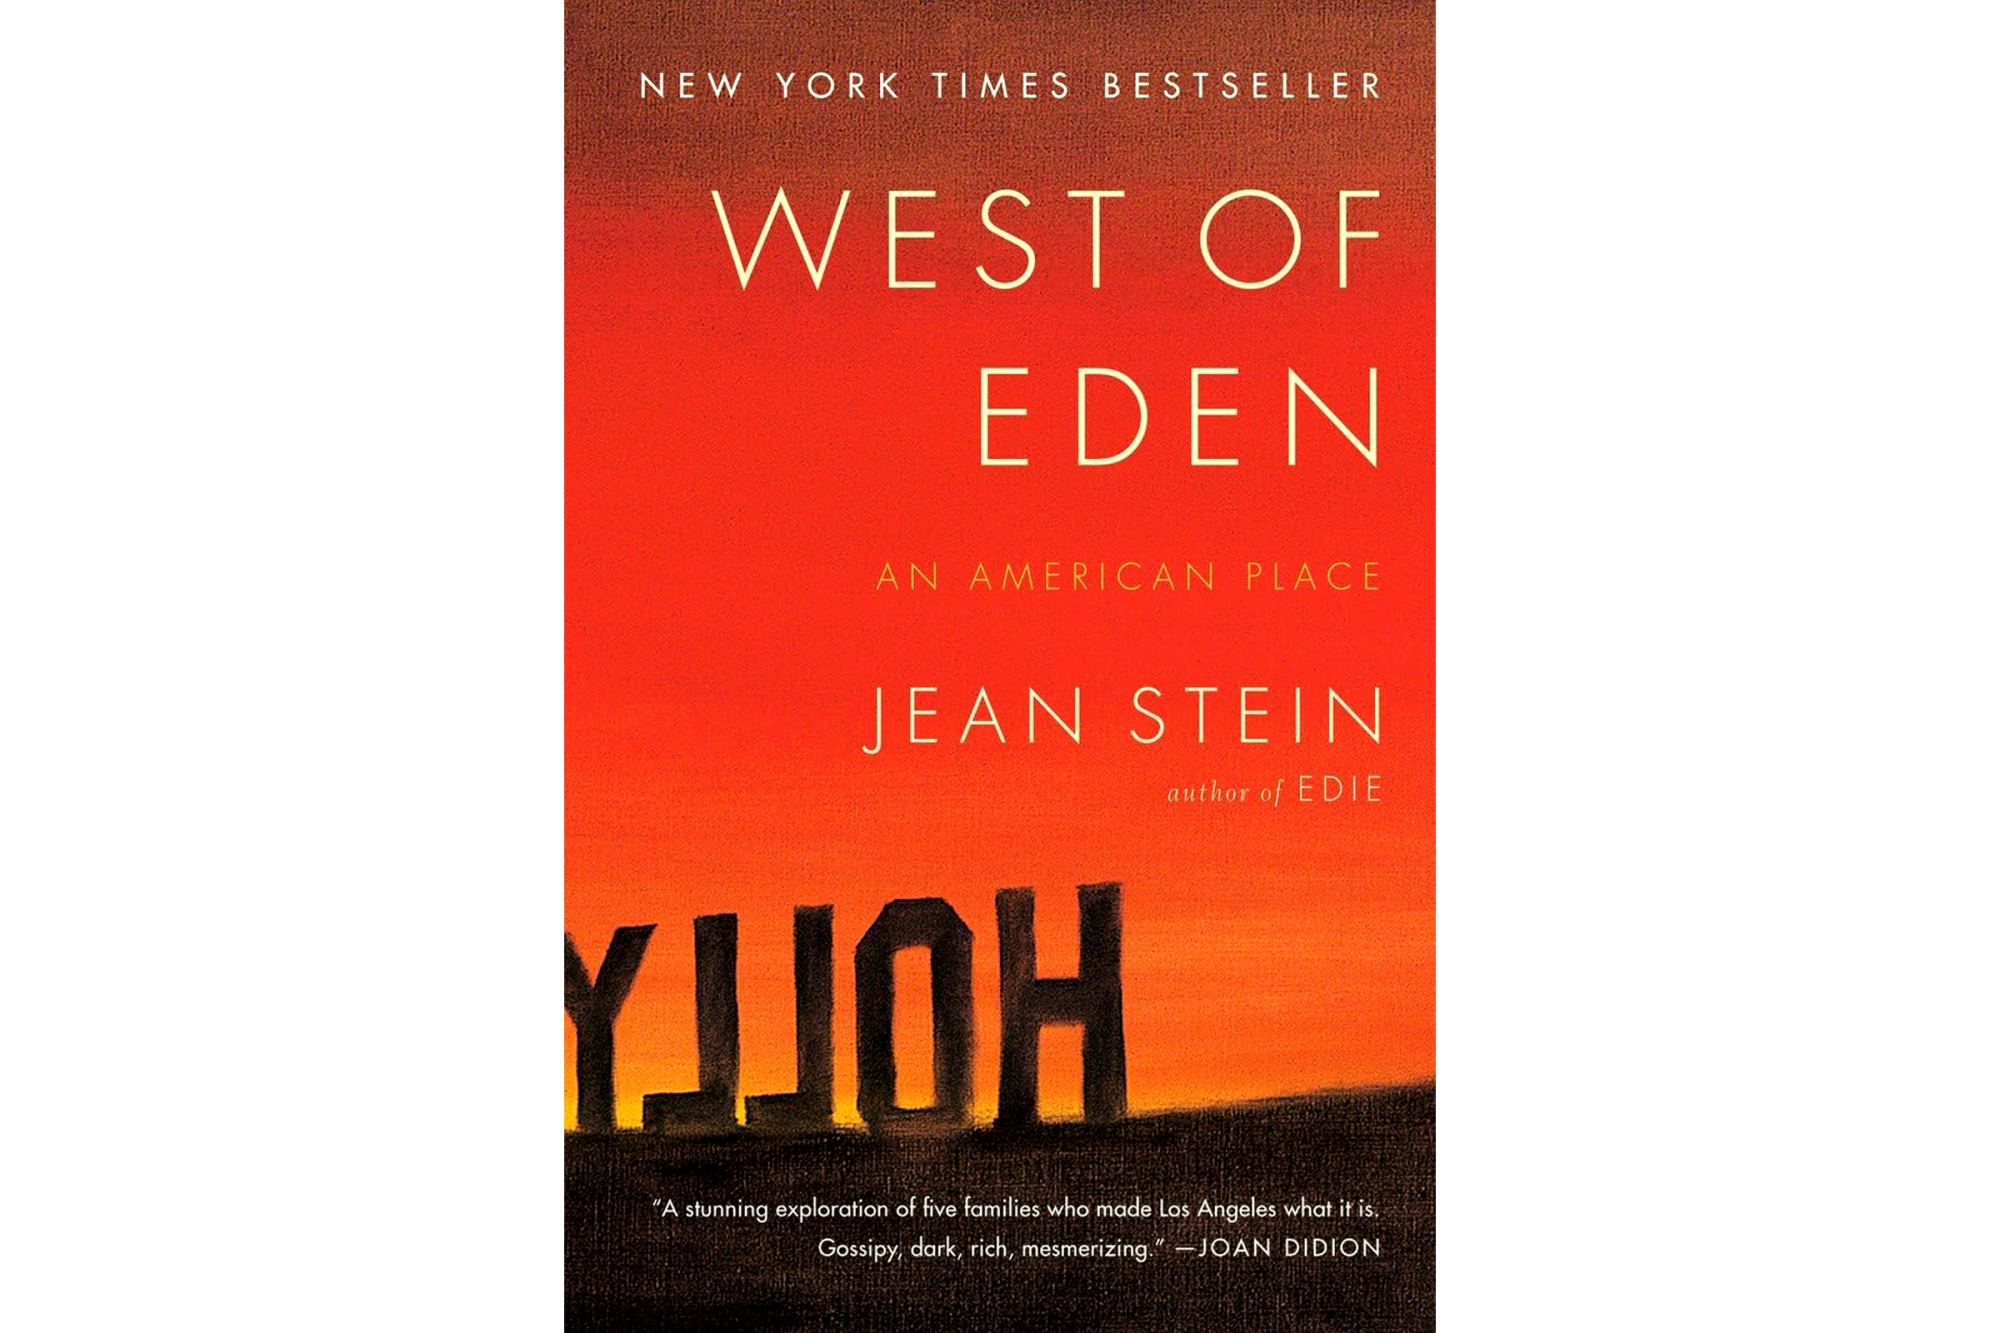 "West of Eden: An American Place" by Jean Stein